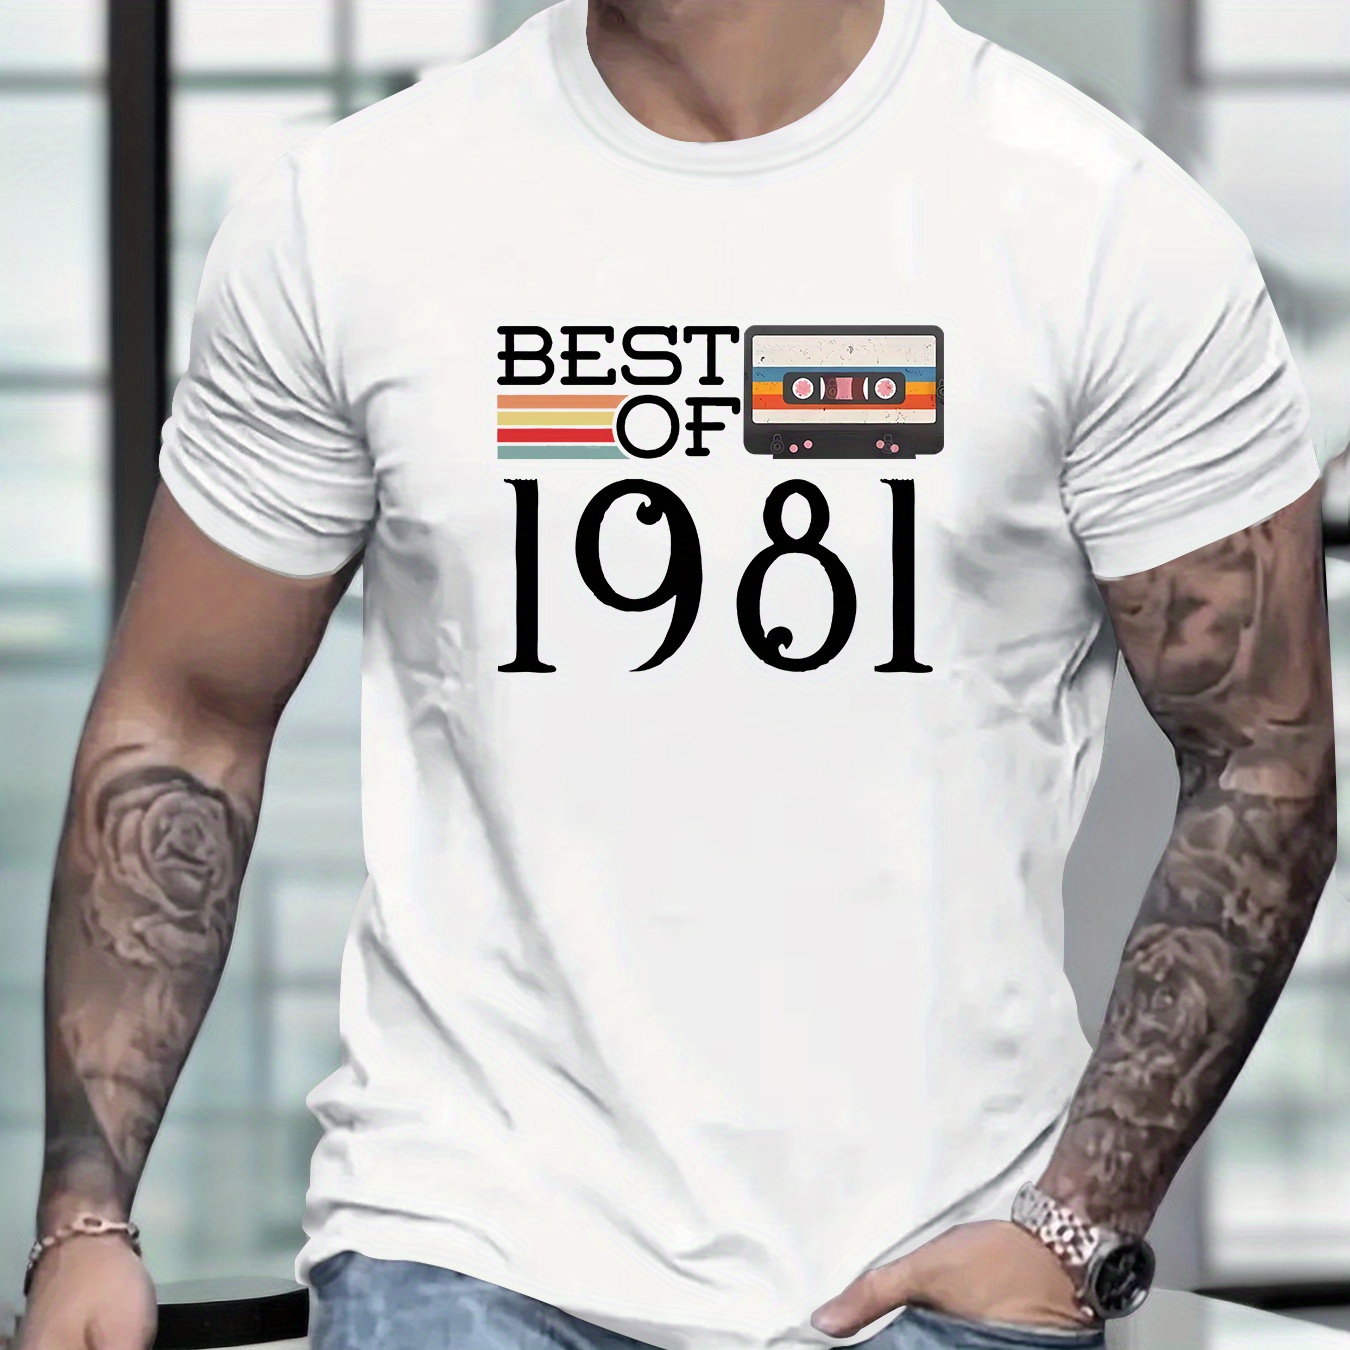 

Best Of 1981 Retro Print Men's T-shirt, Crew Neck Short Sleeve Tees For Summer, Casual Comfortable Versatile Top For Outdoor Sports Daily Street